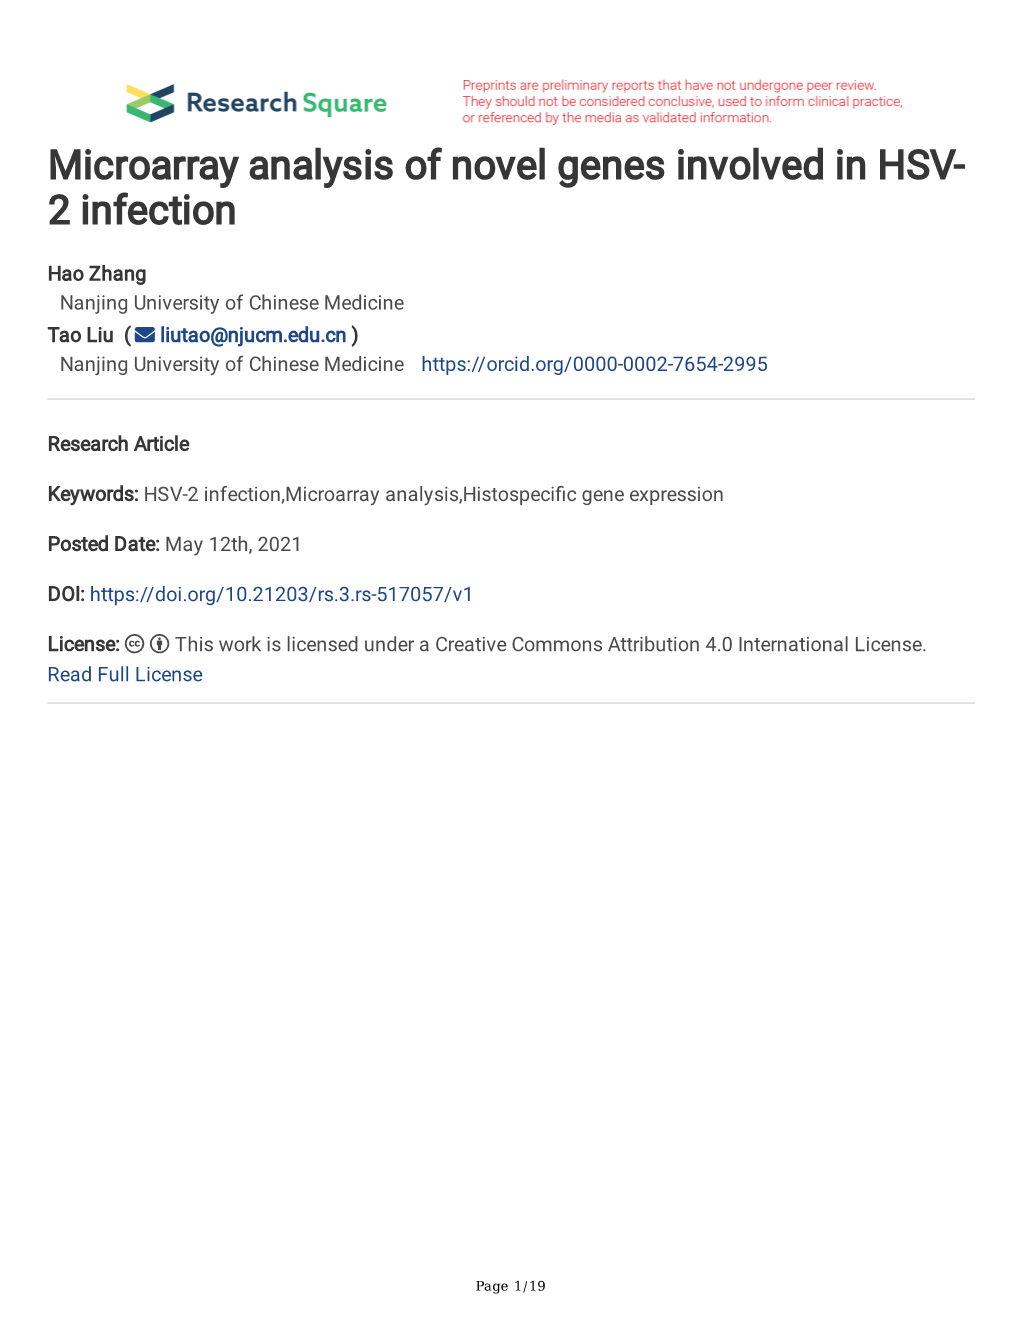 Microarray Analysis of Novel Genes Involved in HSV- 2 Infection